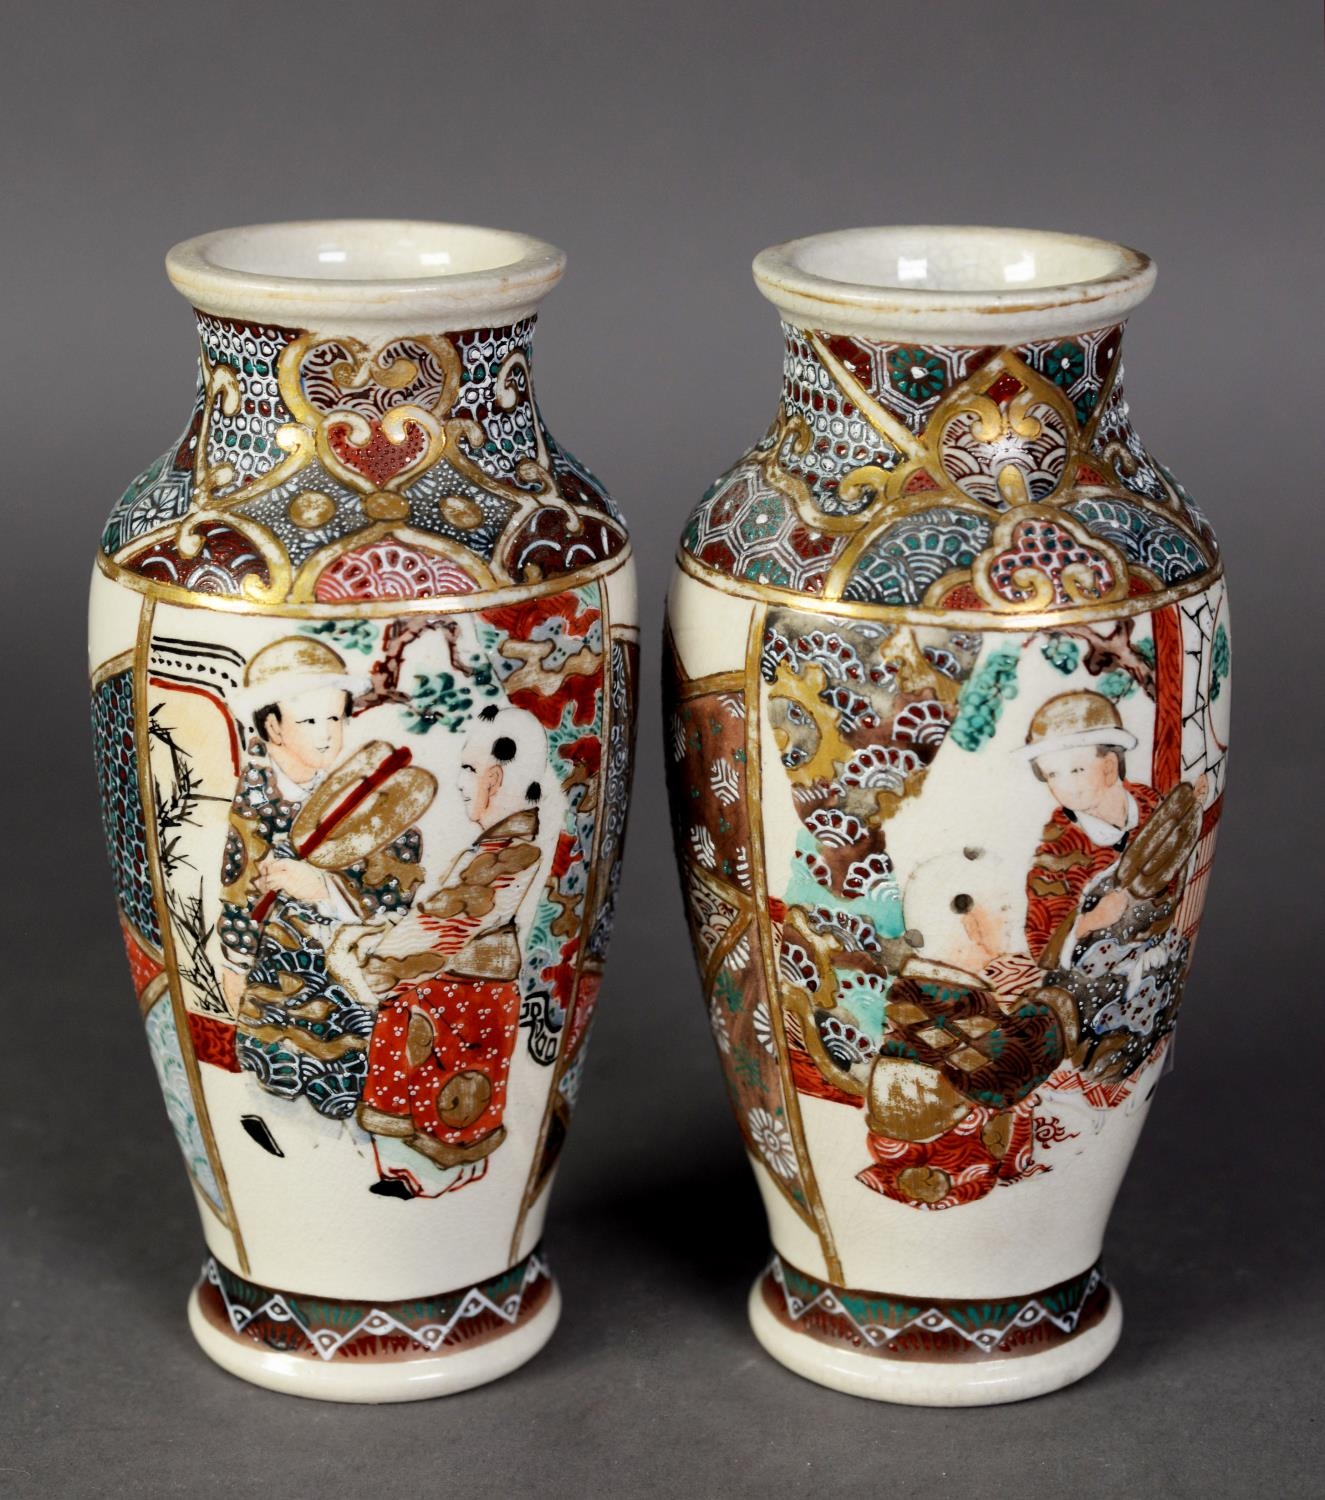 PAIR OF EARLY TWENTIETH CENTURY JAPANESE PORCELAIN WALL PLAQUES, decorated in polychrome enamels